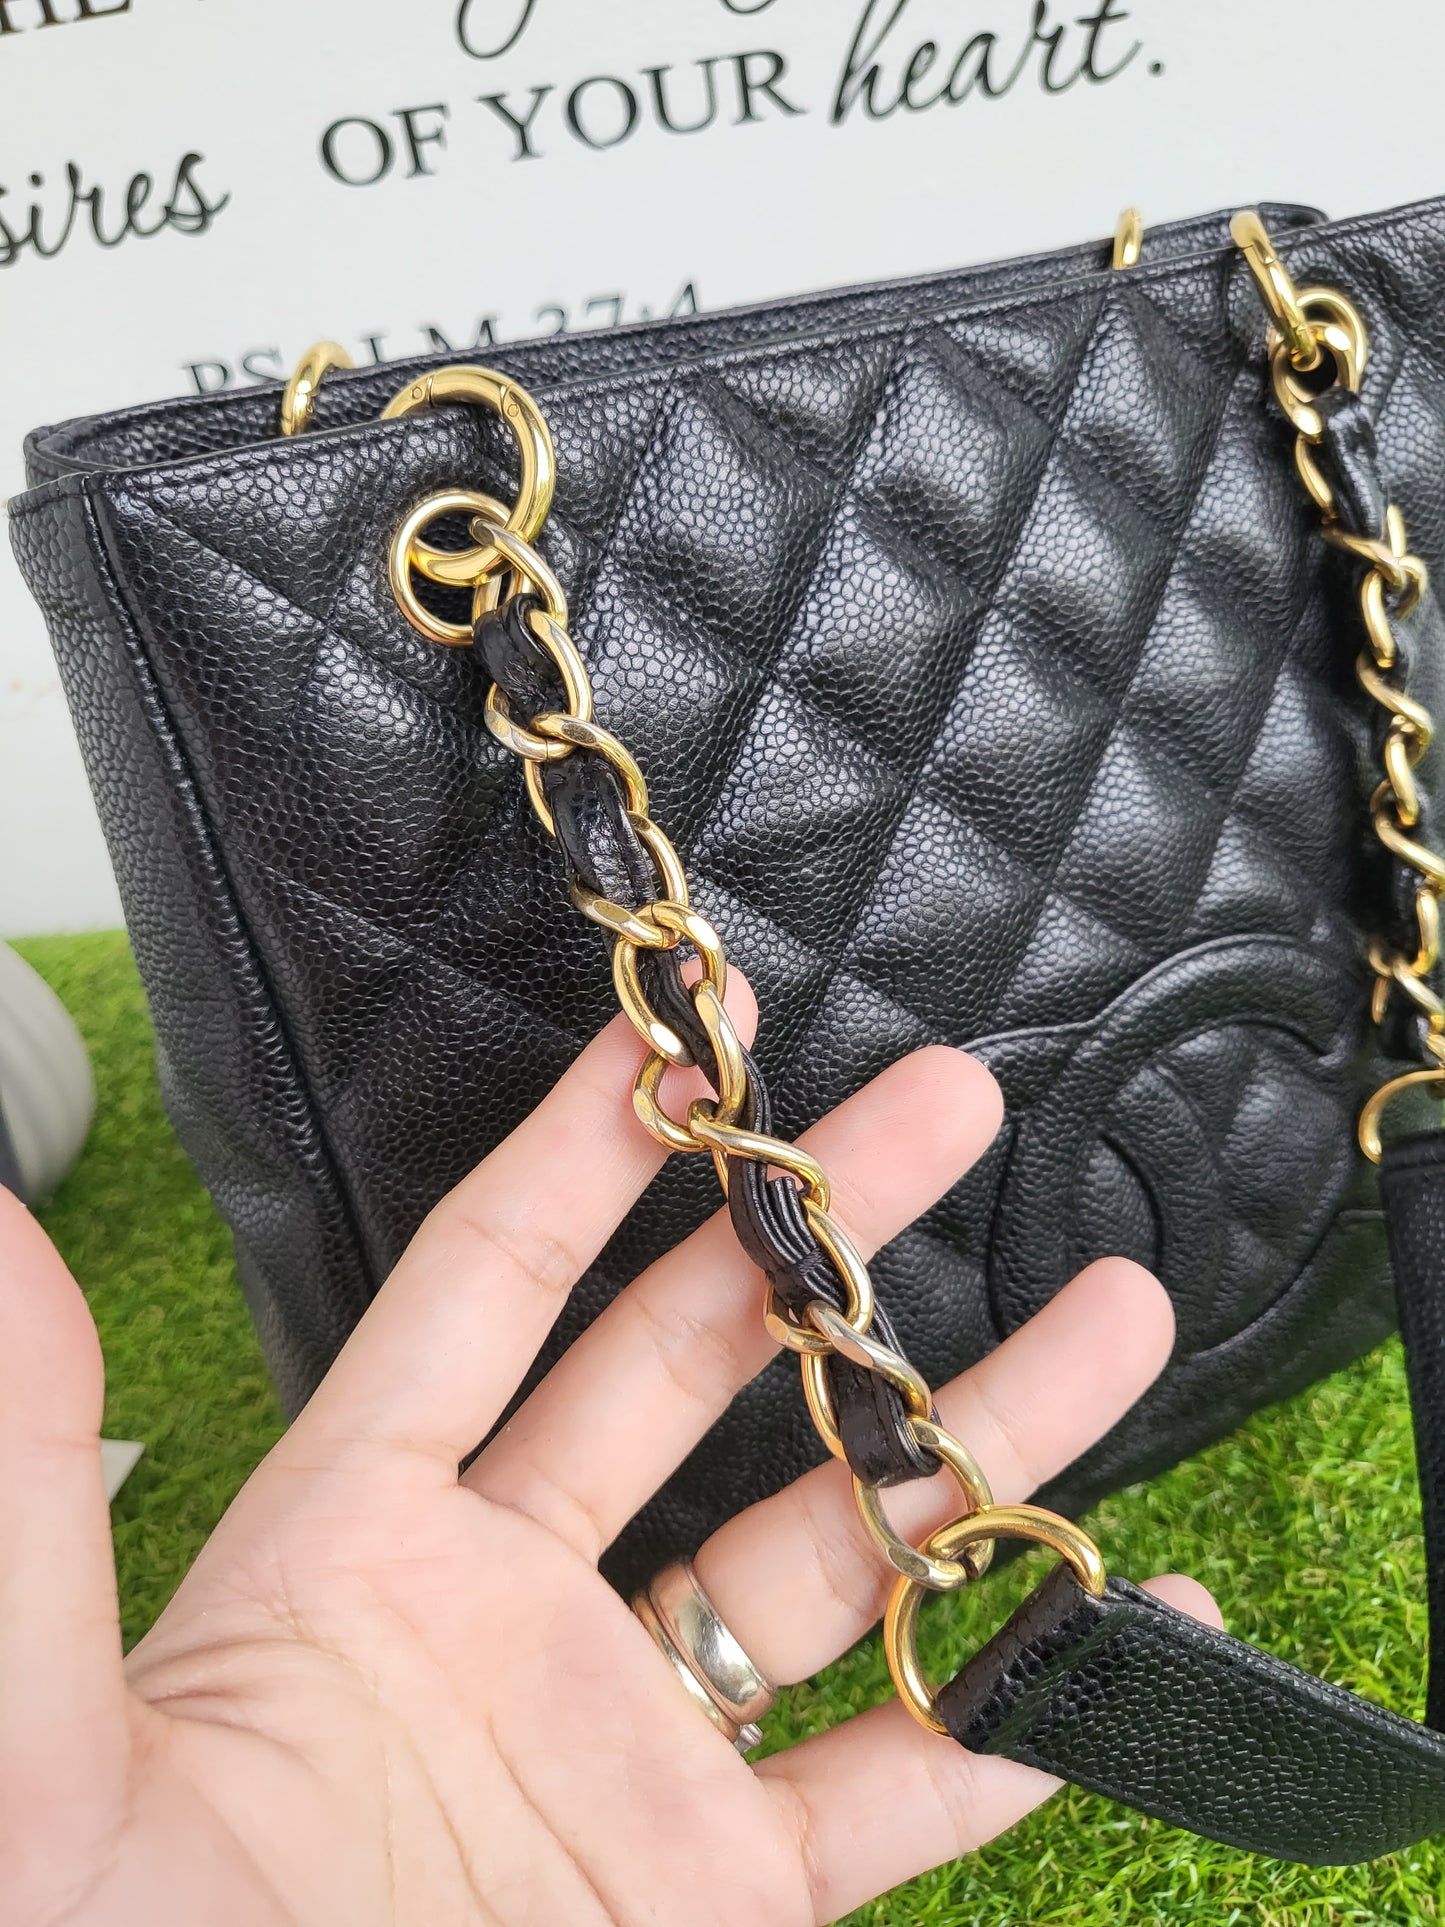 Chanel PST (petite shoppers tote)